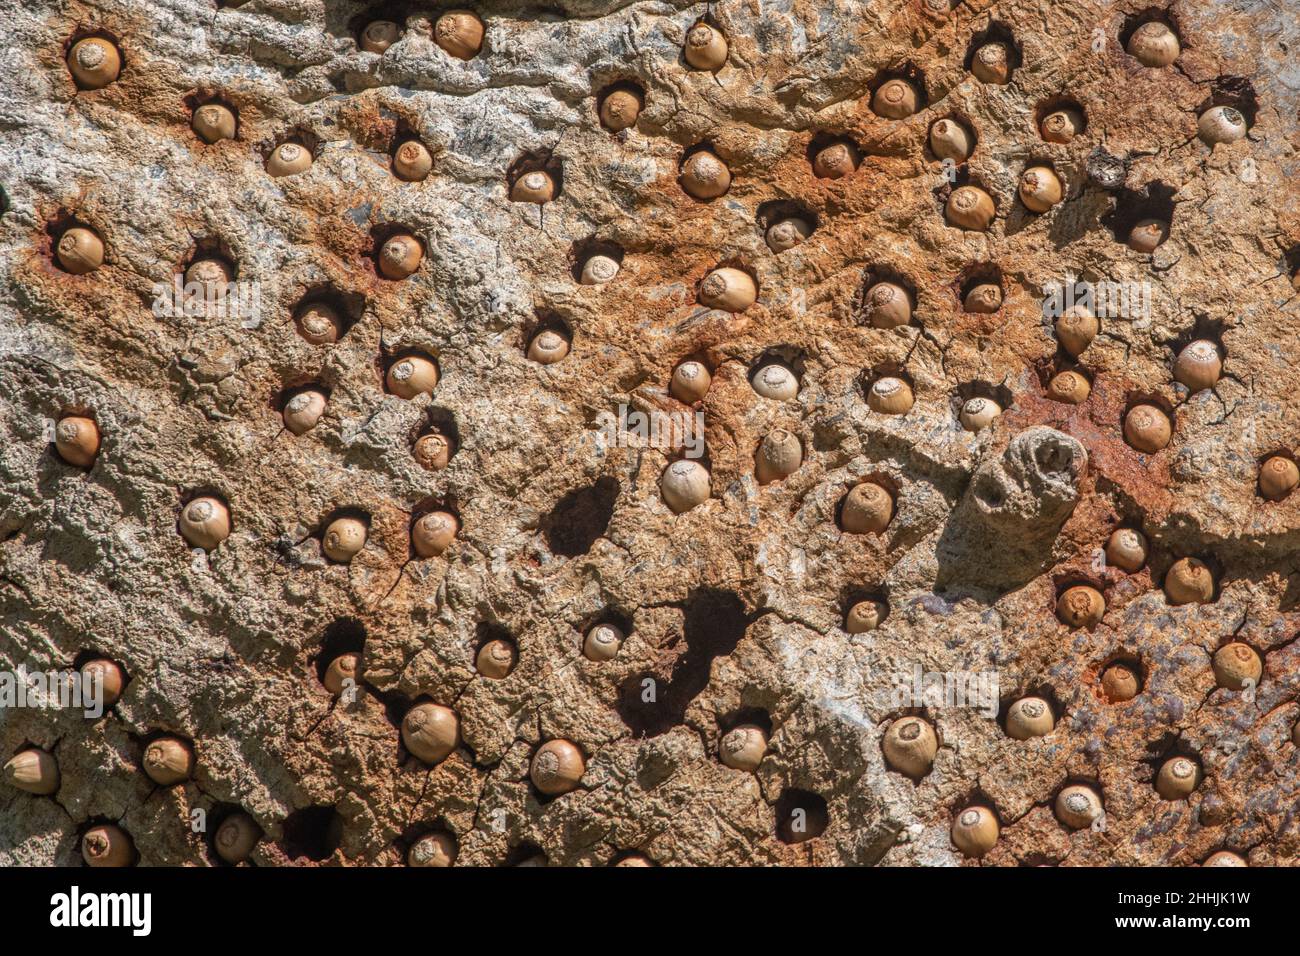 This oak tree serves as a granary tree for a group of acorn woodpeckers where they store acorns to eat later. Stock Photo